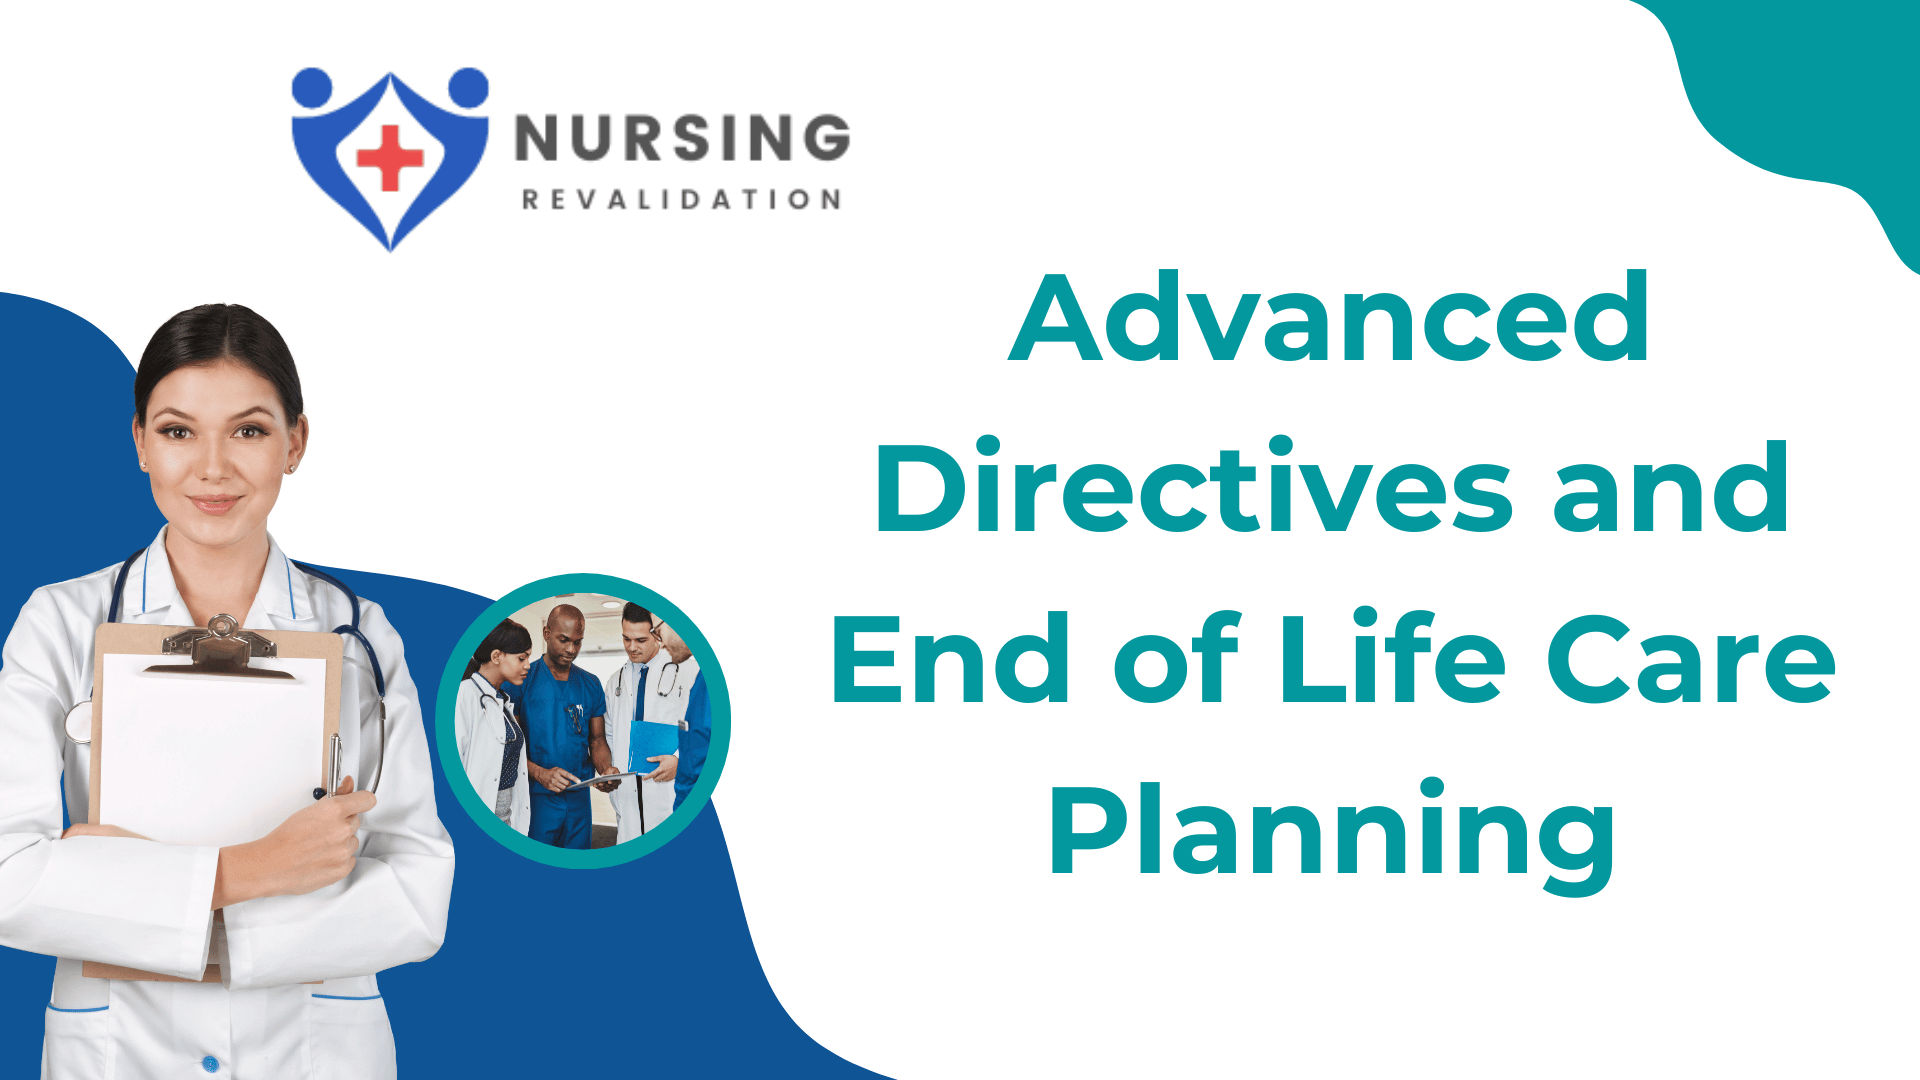 Advanced Directives and End of Life Care Planning